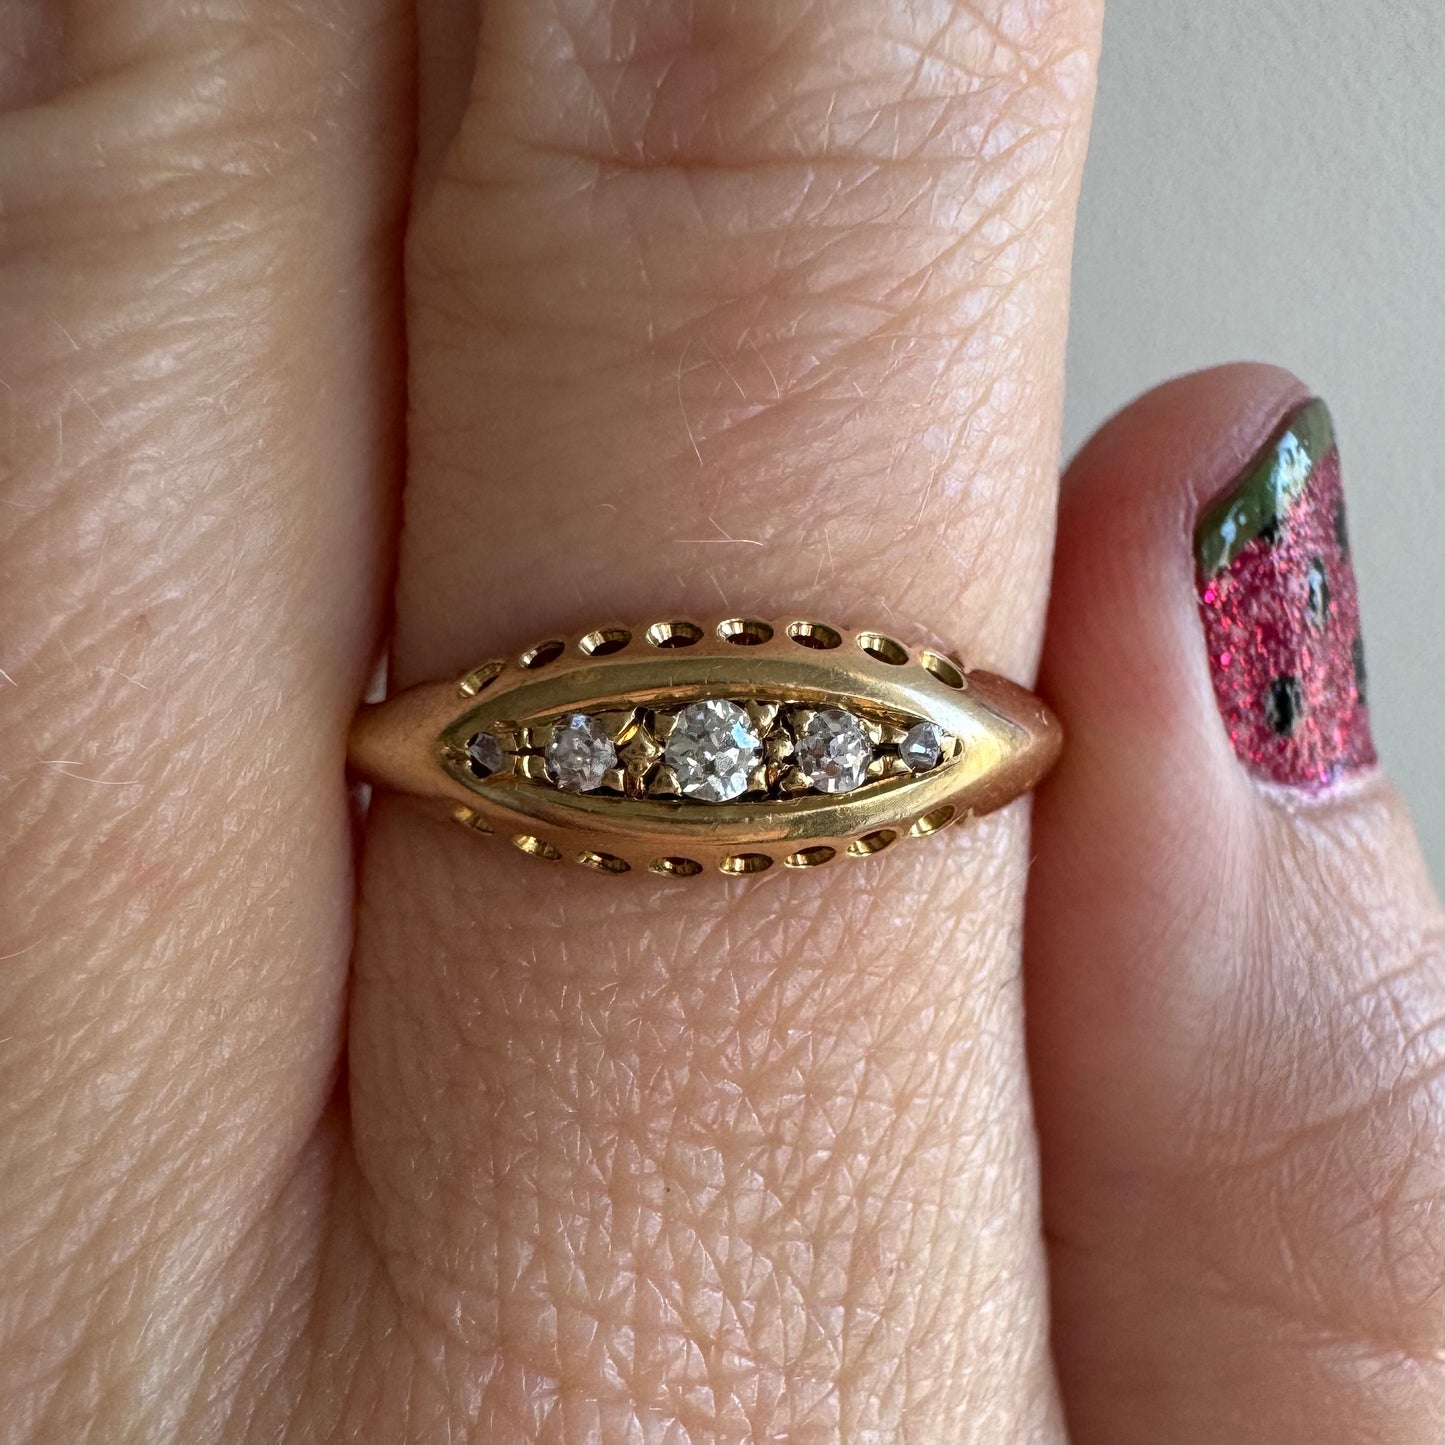 A N T I Q U E // 10/5/21 boat / 18k and old cut diamond boat ring / size 8.25